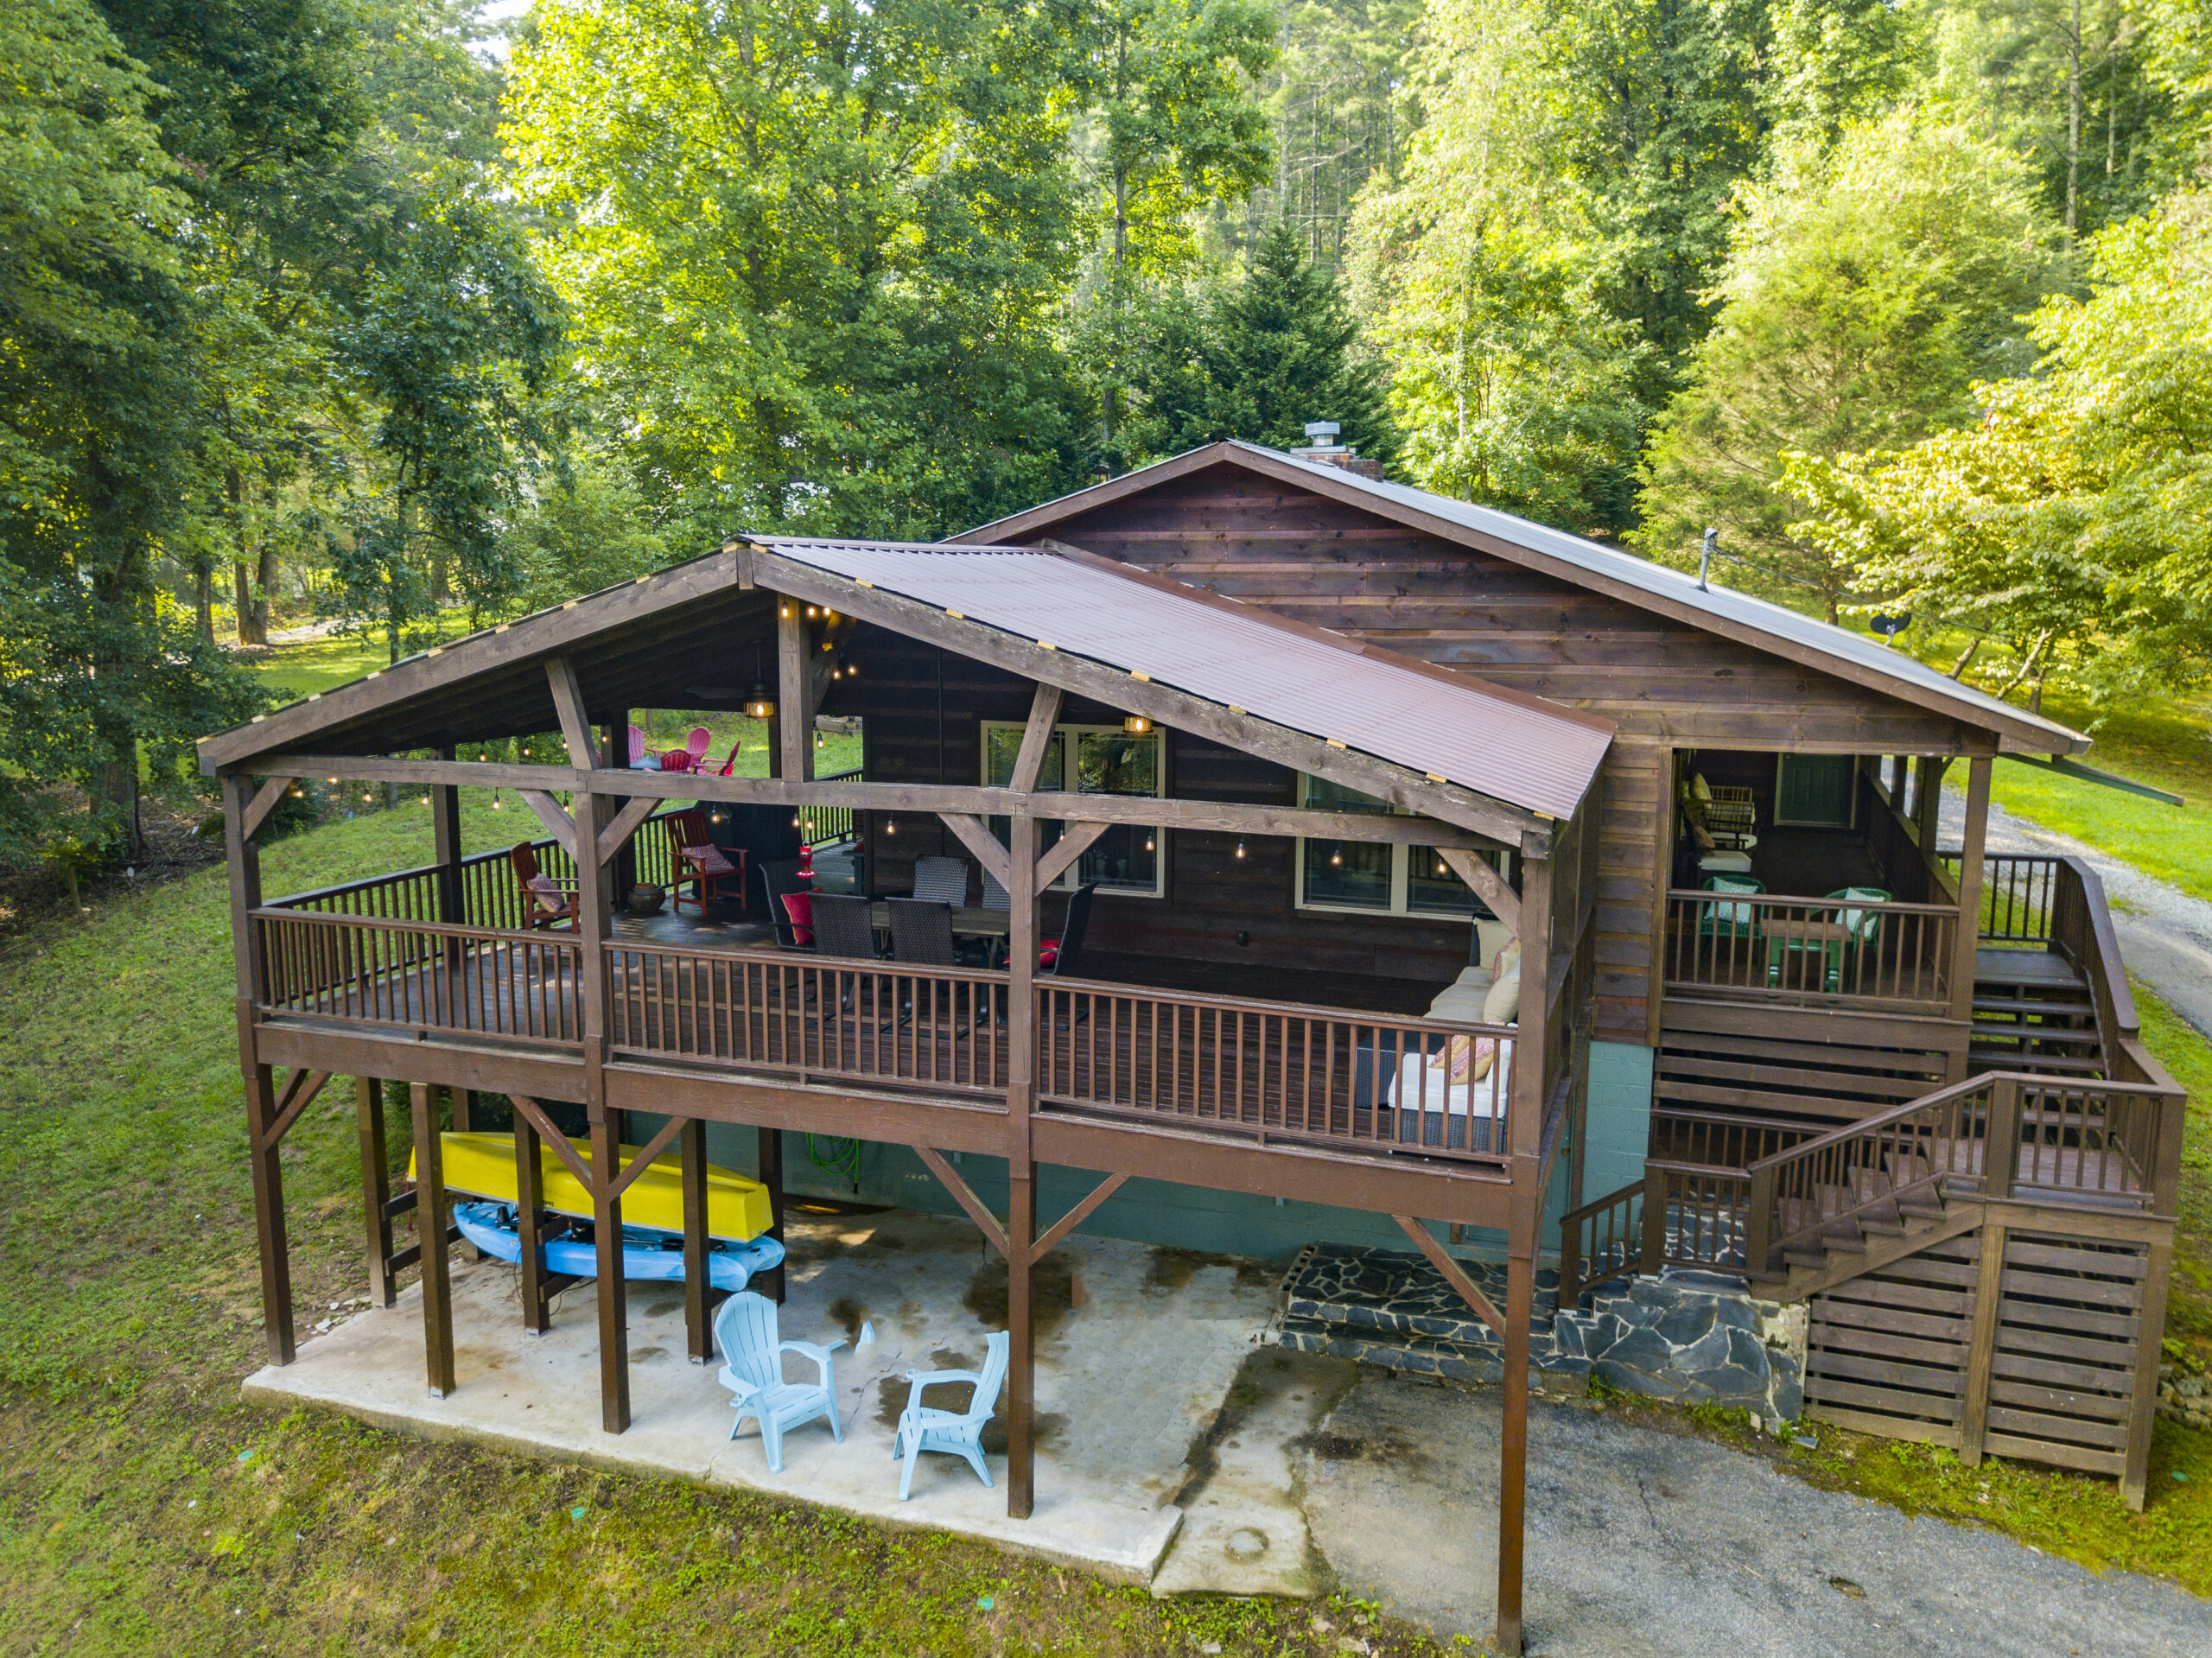 Moon Tower Cabin in Blairsville is a 3 bedroom, 2 bath cabin with a Game Room, Outdoor Fire Pit, small lake, Internet, and covered porches and decks.